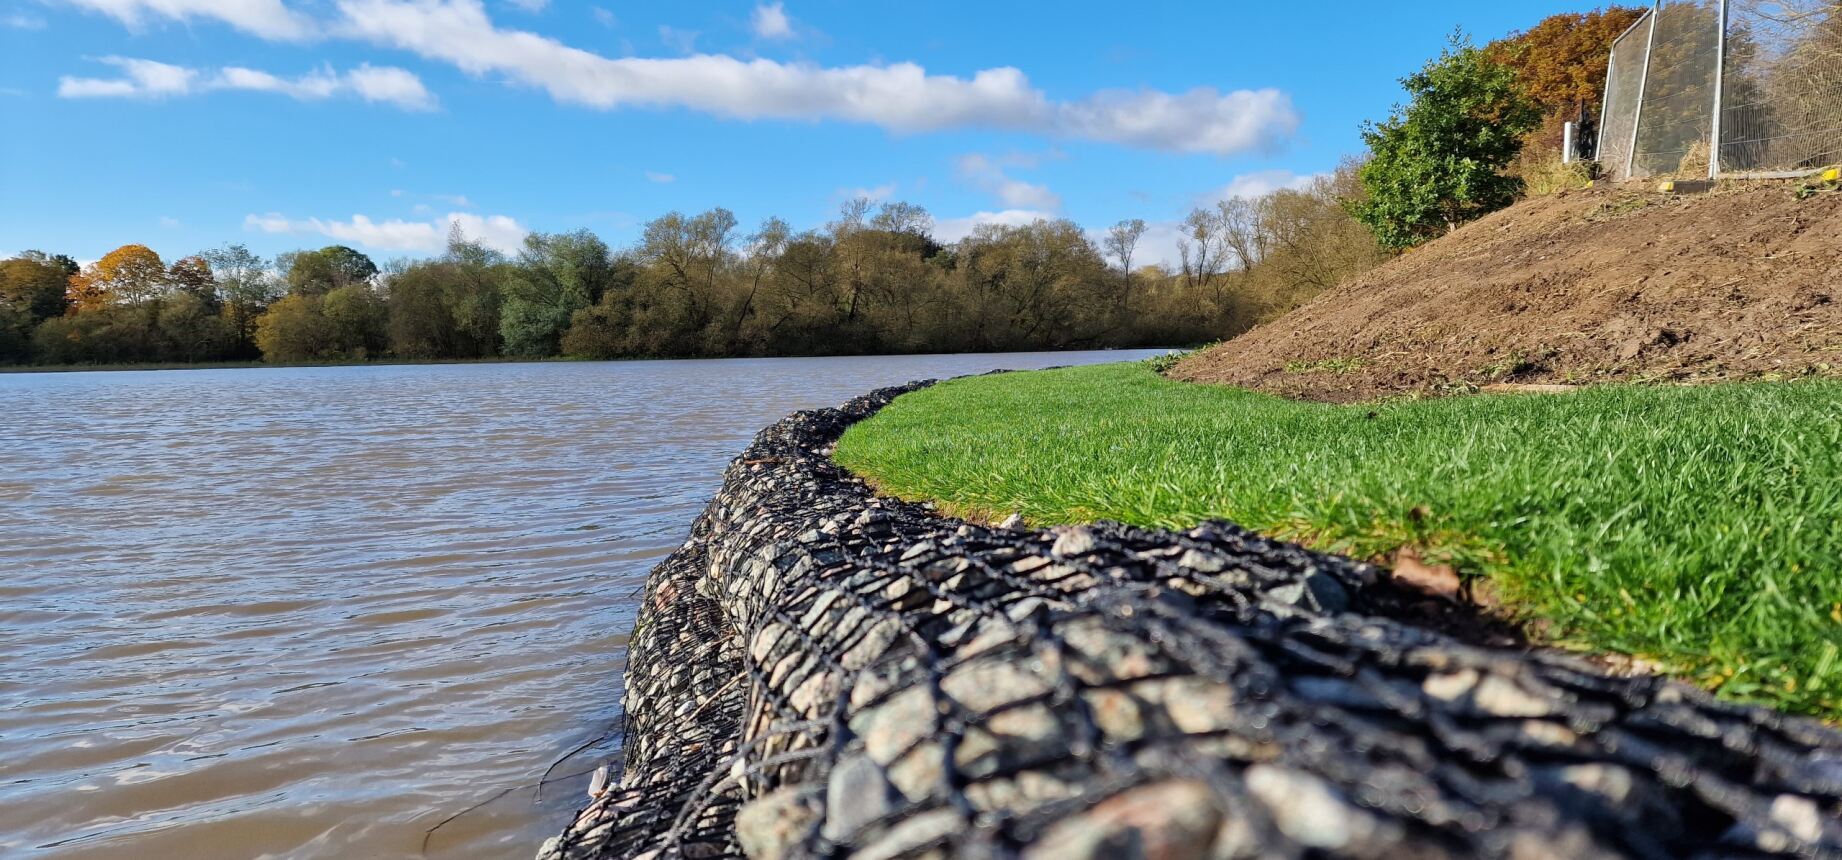 Worsbrough Reservoir wall rebuilt with biodiversity-enhancing rock bagsA new bankside wall using material ideal for aquatic insects has been ins...